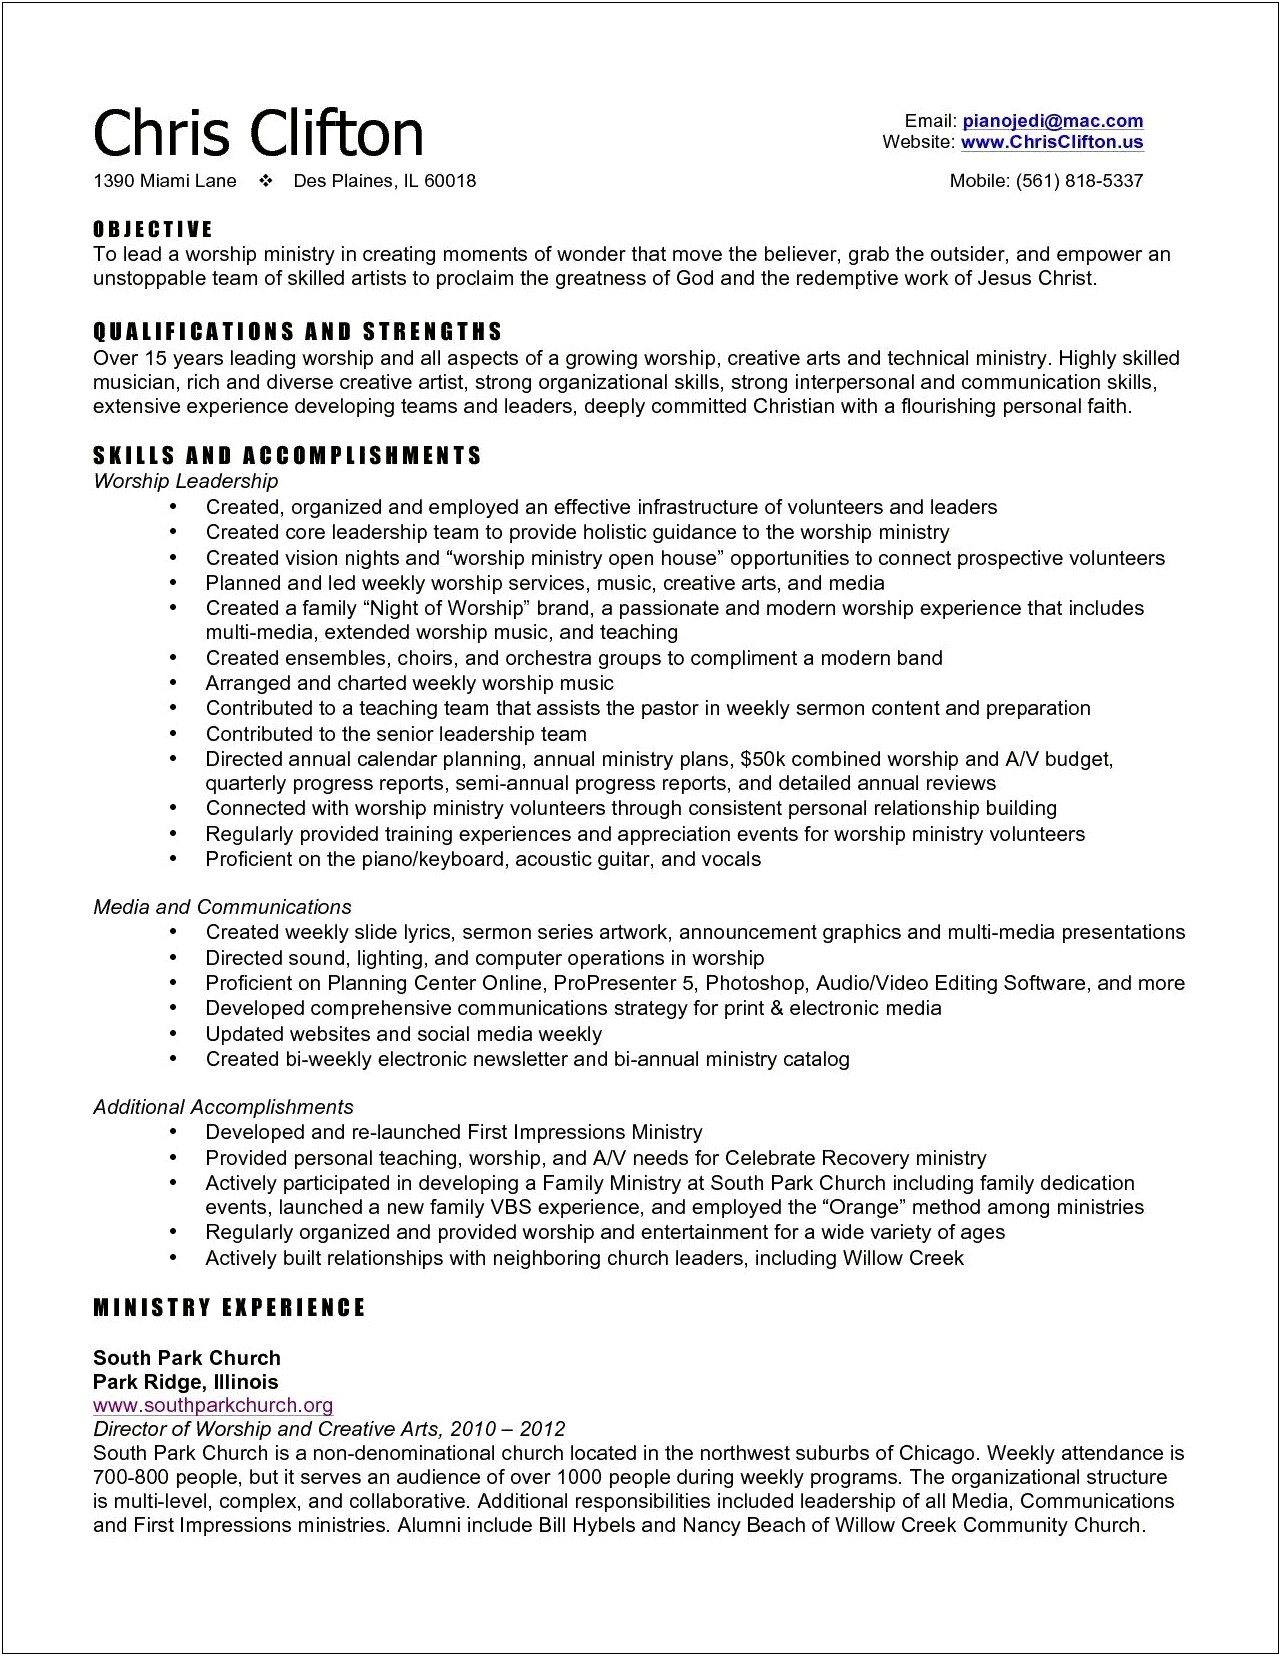 Writing A Resume For A Church Job